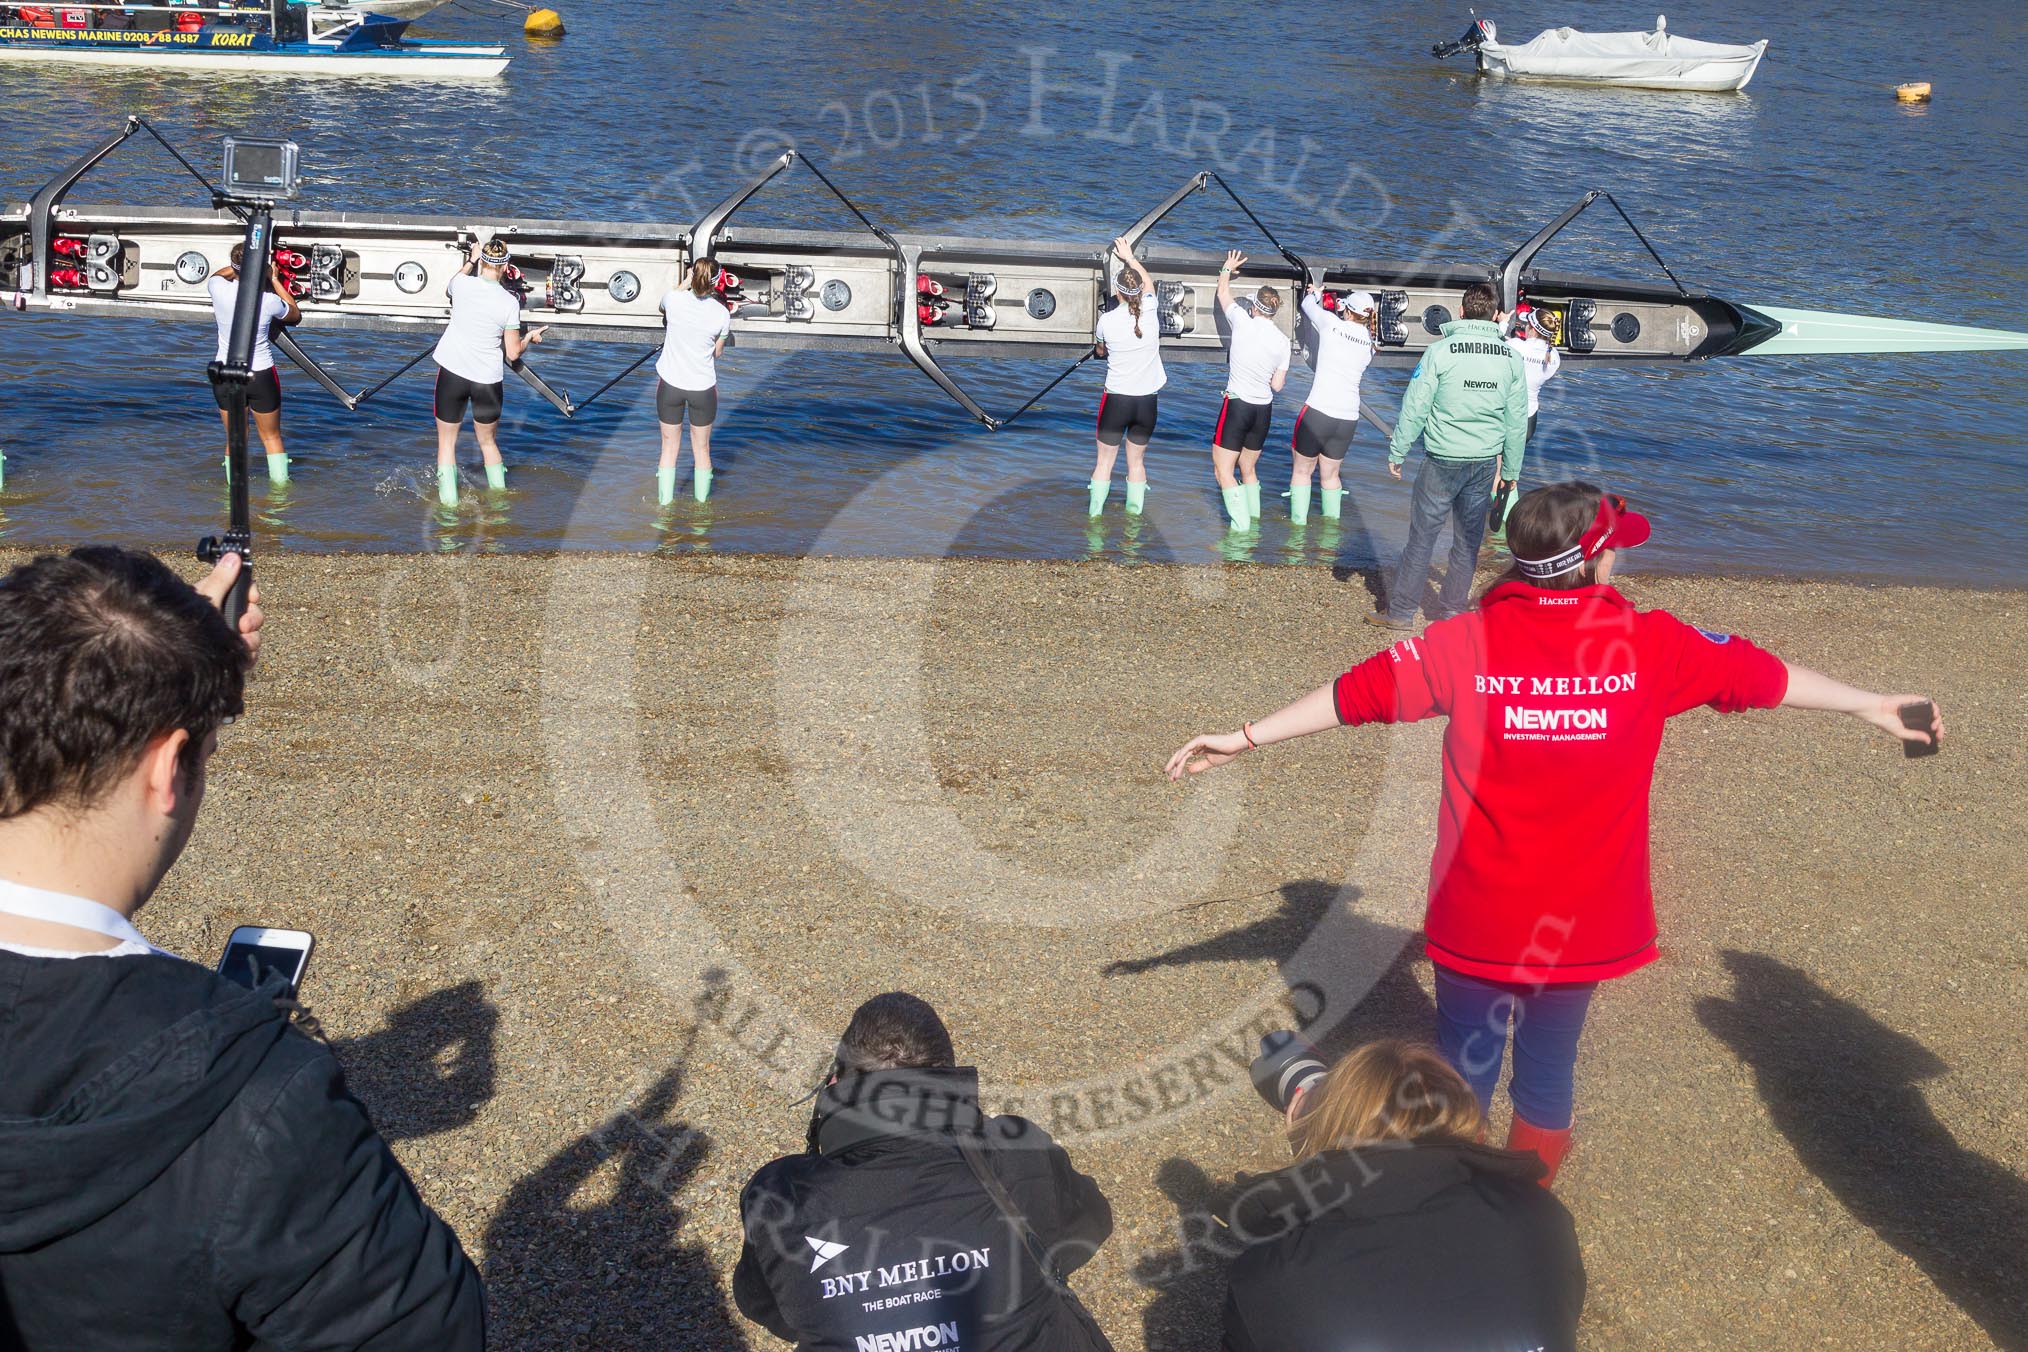 The Boat Race season 2015 - Newton Women's Boat Race.
River Thames between Putney and Mortlake,
London,

United Kingdom,
on 11 April 2015 at 16:02, image #83